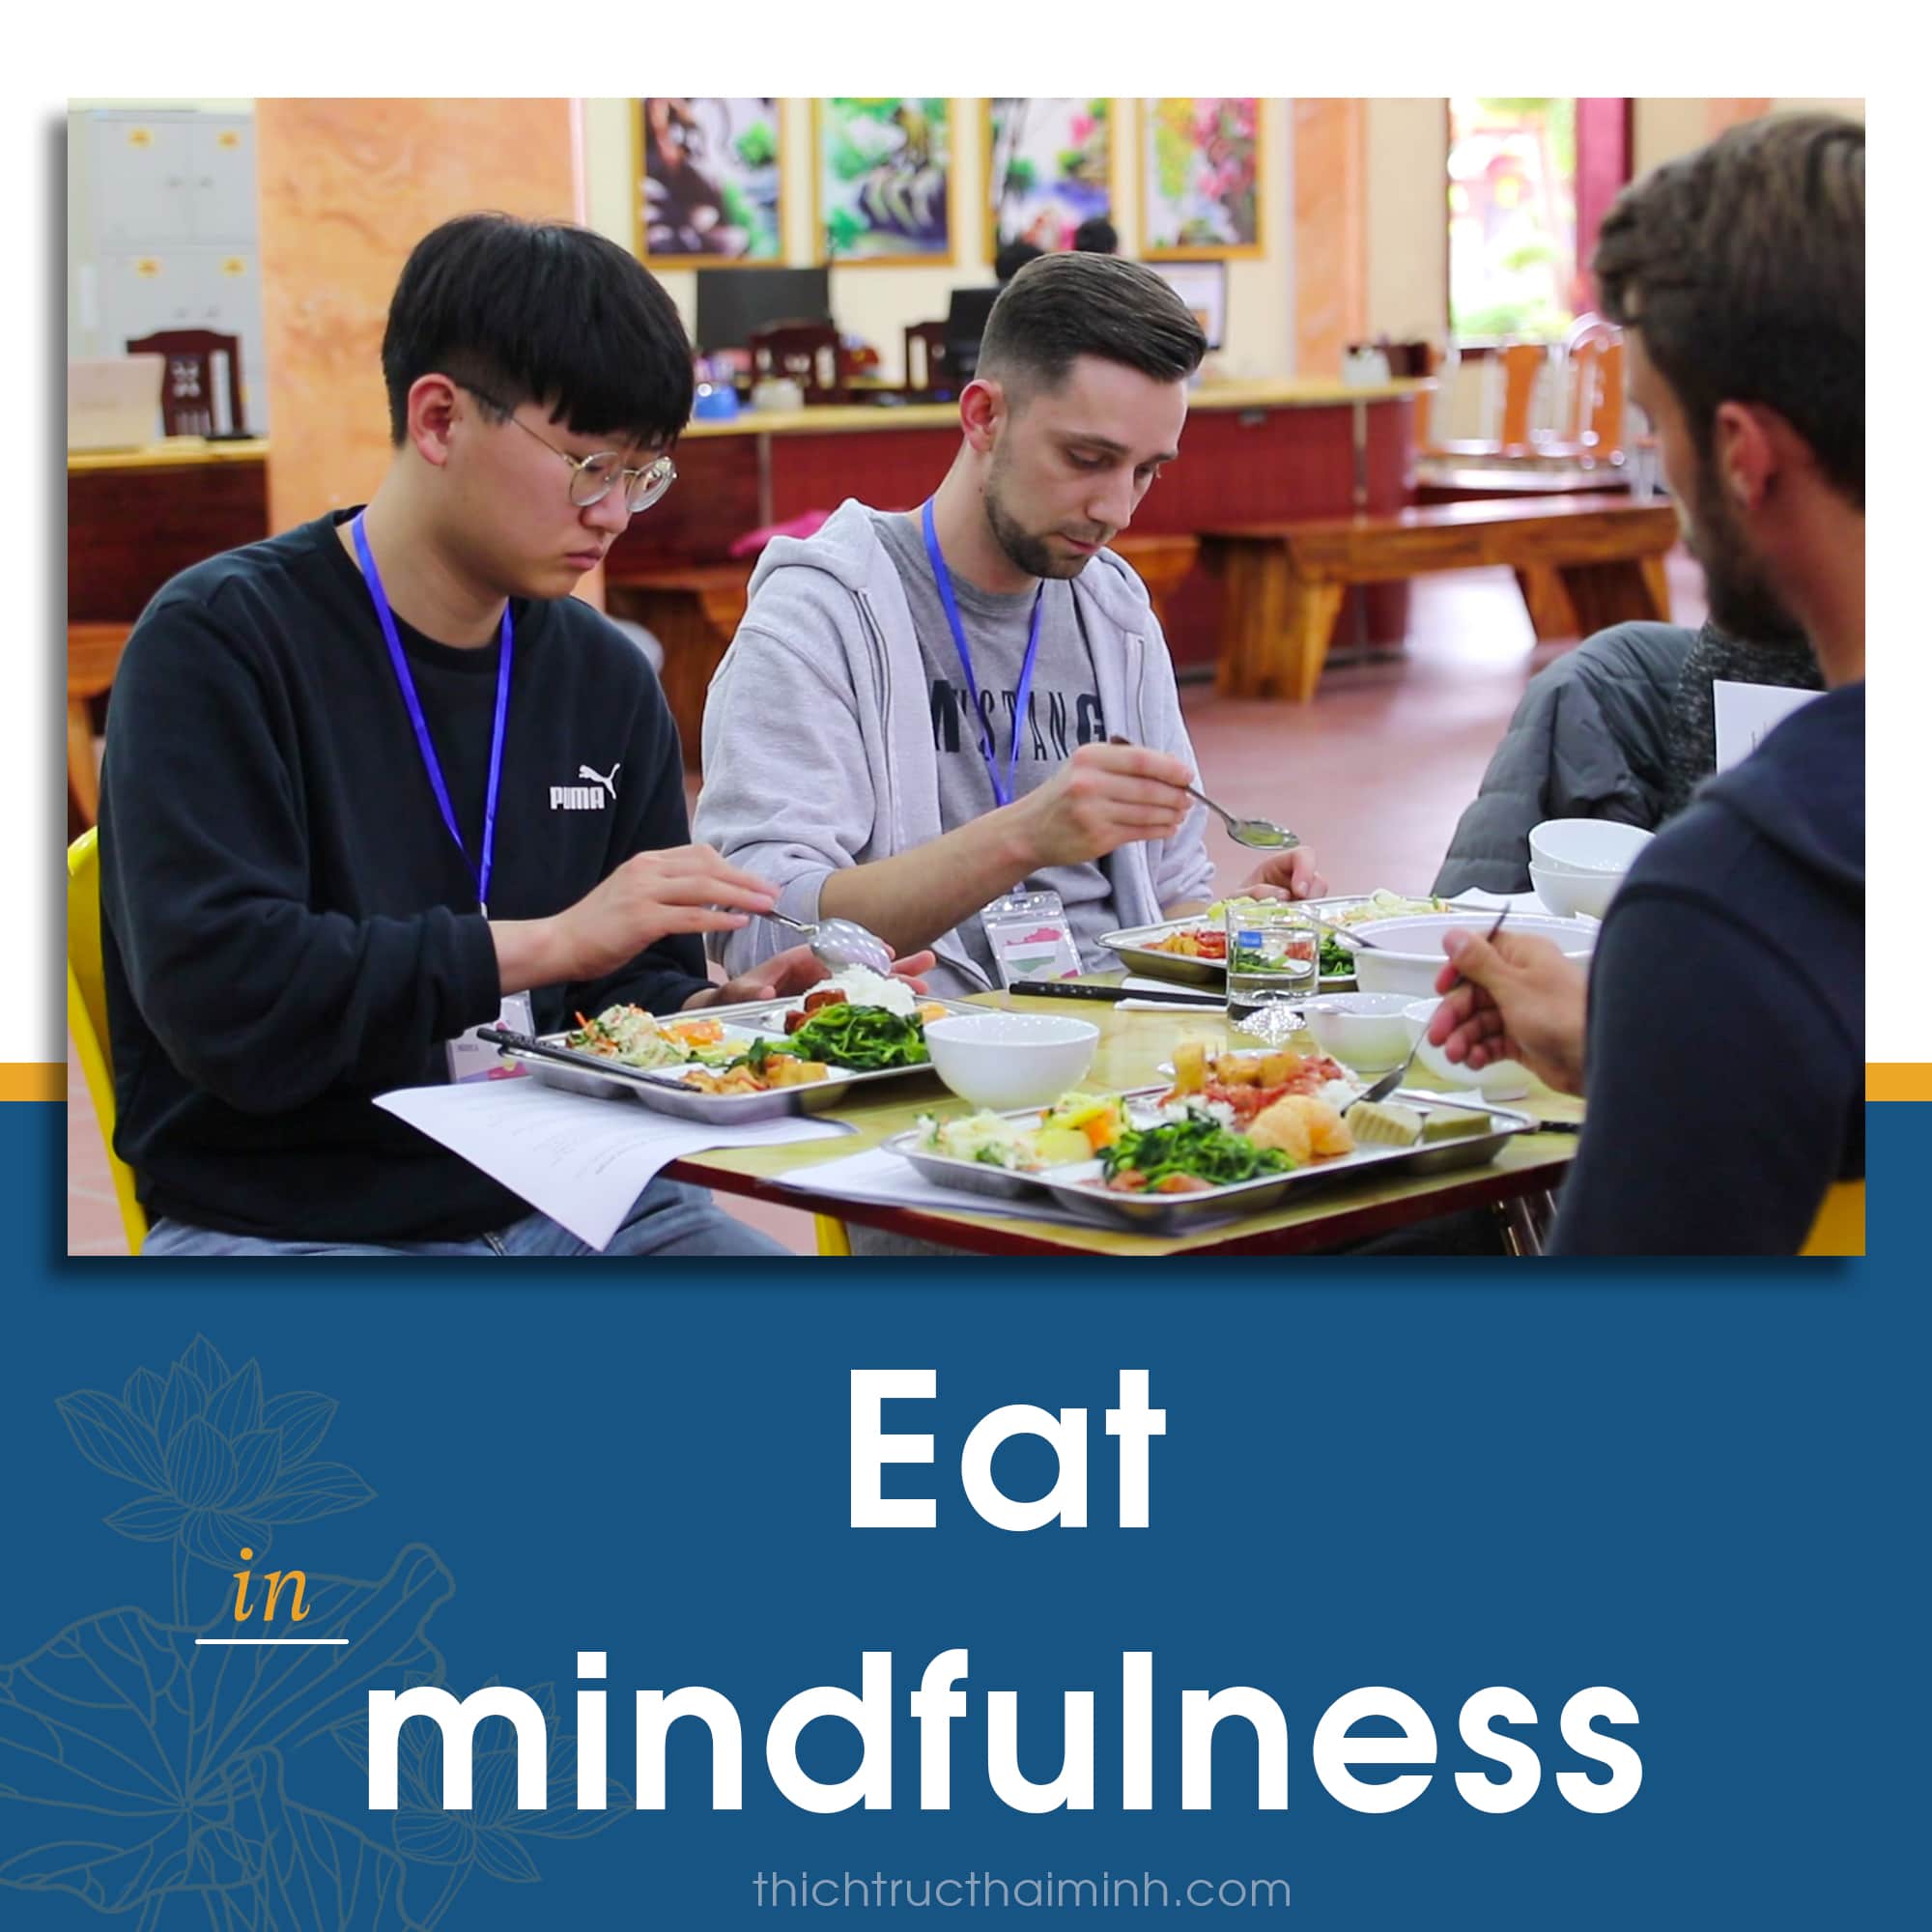 Practising eating in mindfulness.